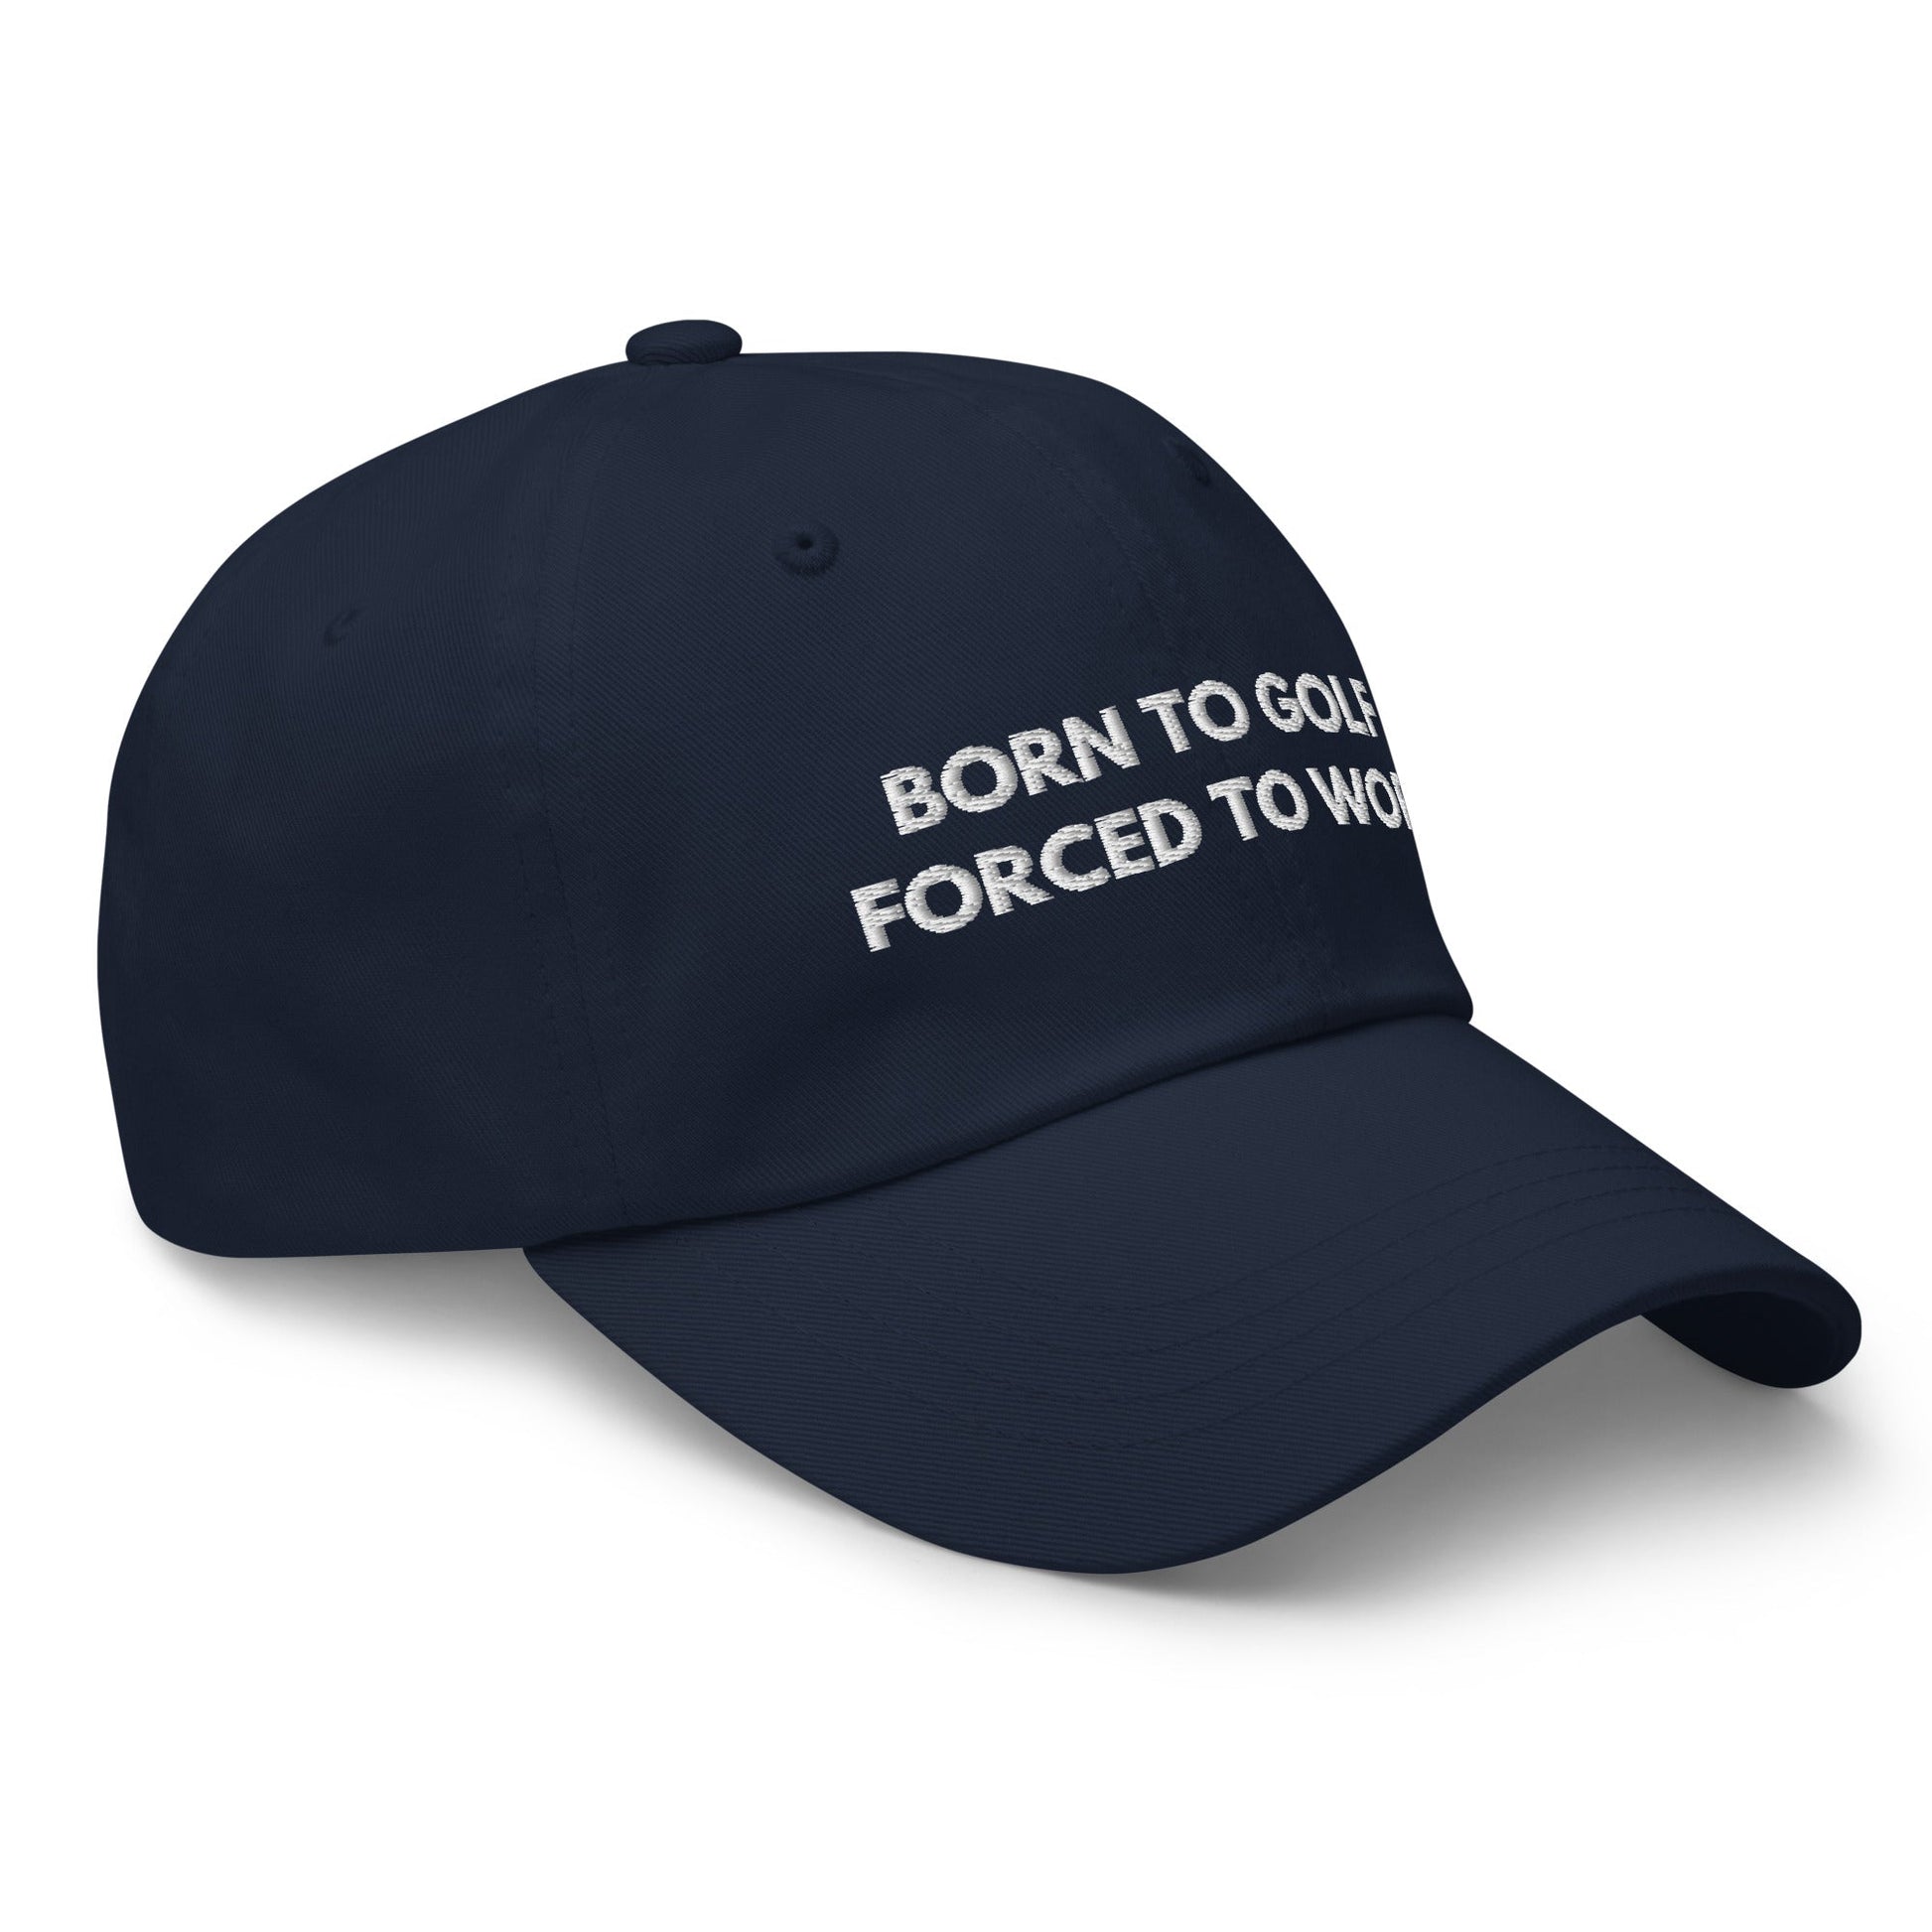 Funny Golfer Gifts  Dad Cap Navy Born to Golf, Forced To Work Hat Cap